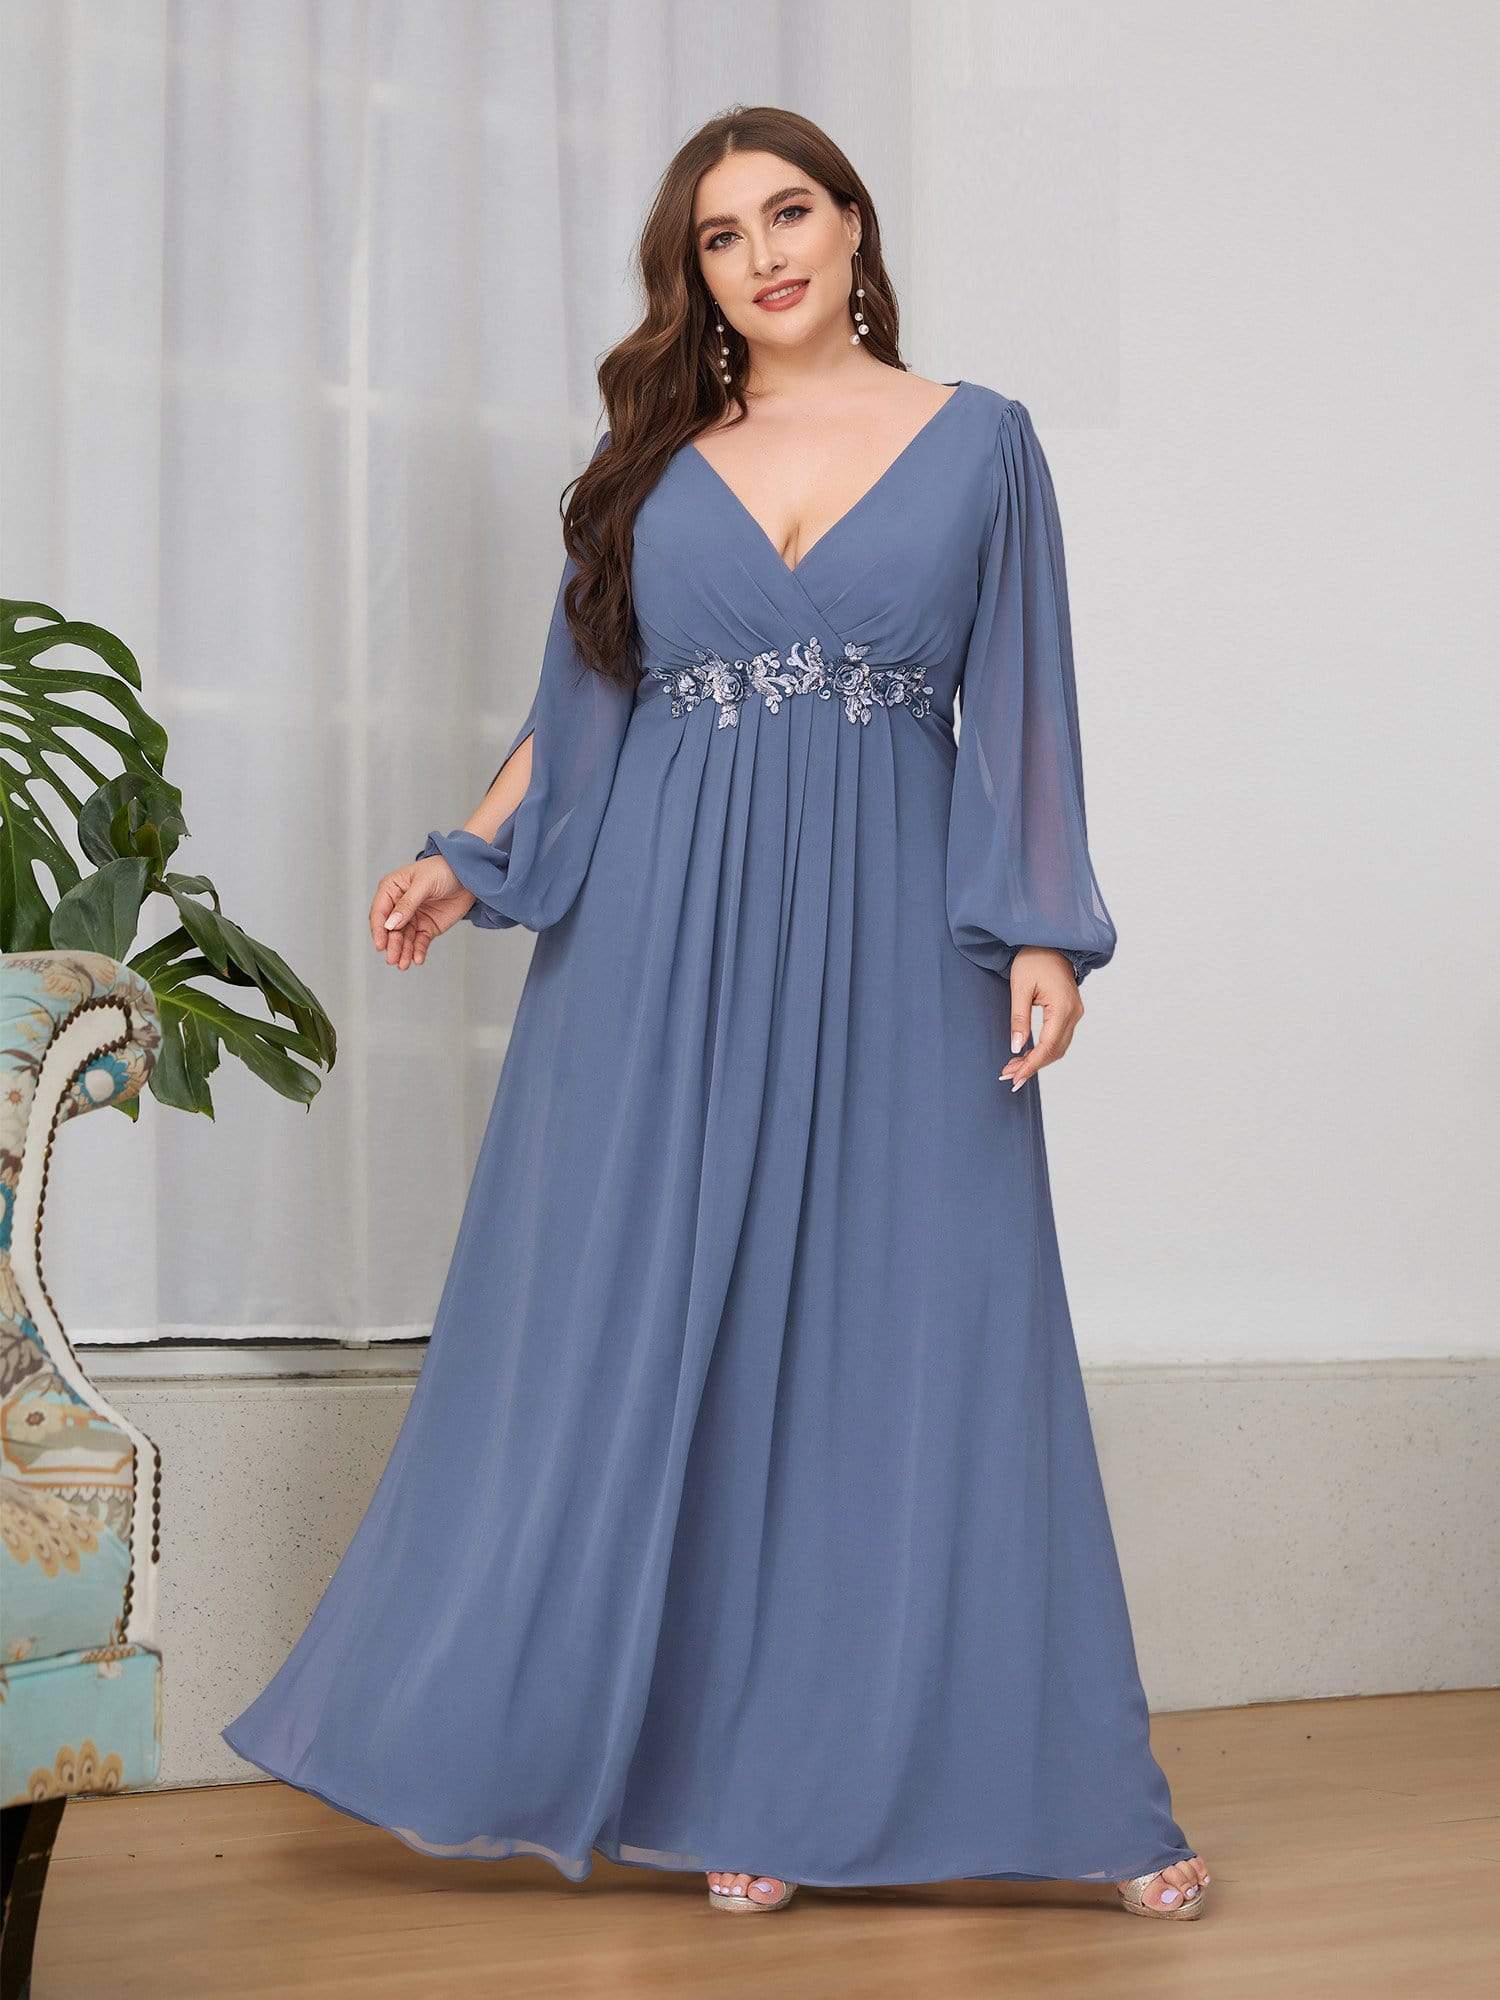 Formal Dresses For Chubby Ladies | sites.unimi.it